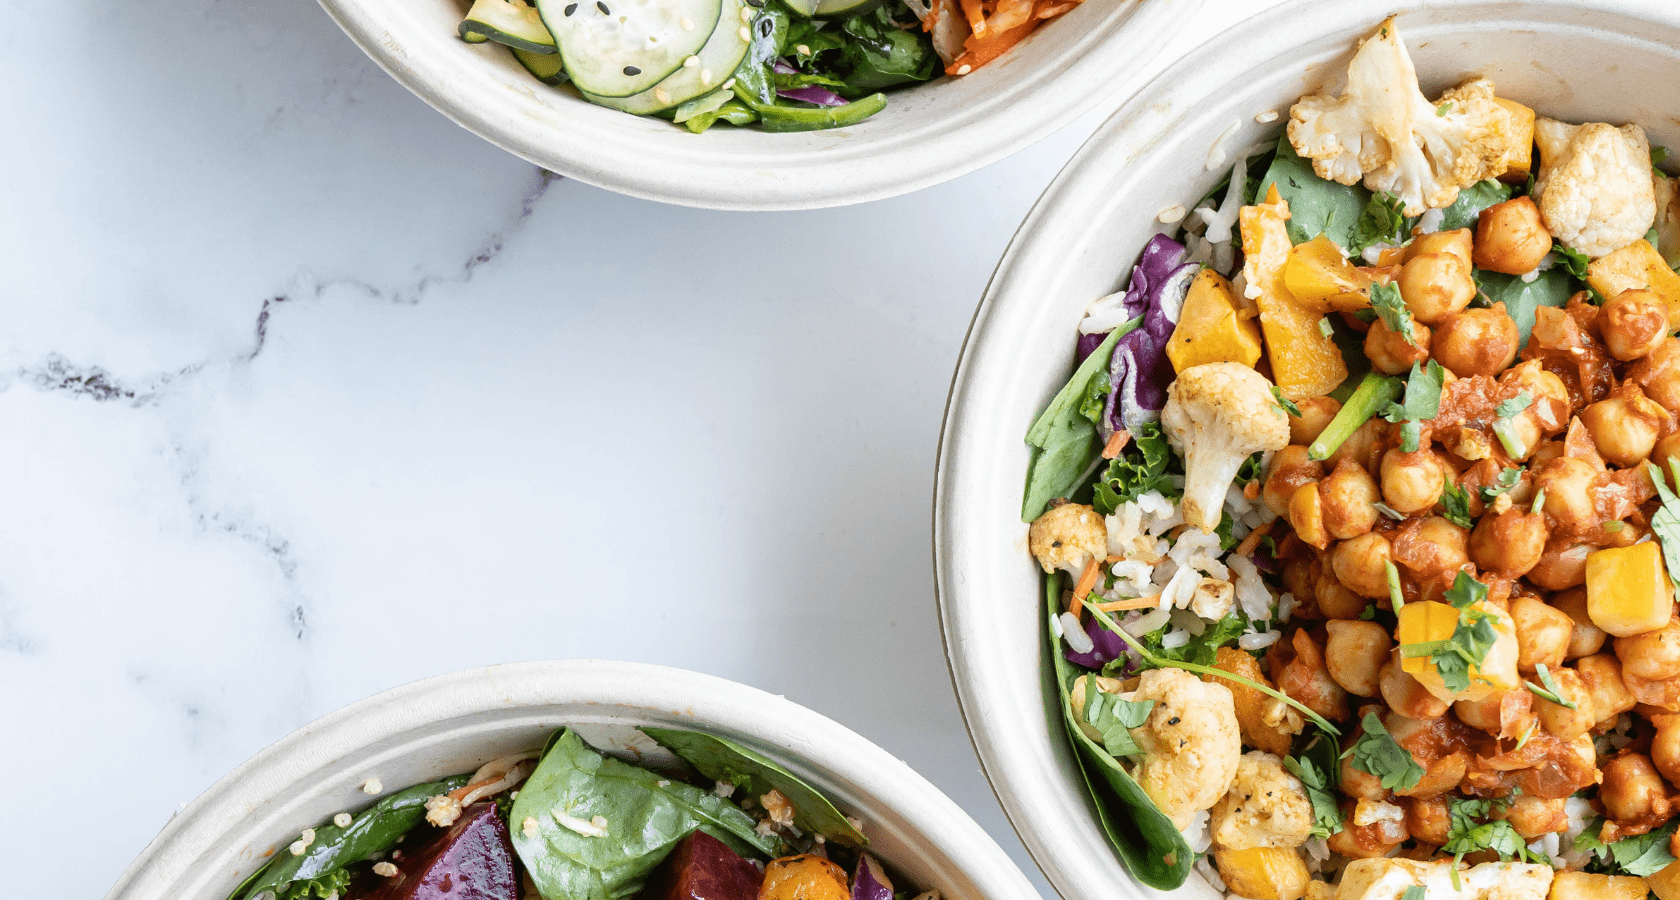 Our Favorite Healthy Restaurants on the inKind App - Veggie Grill